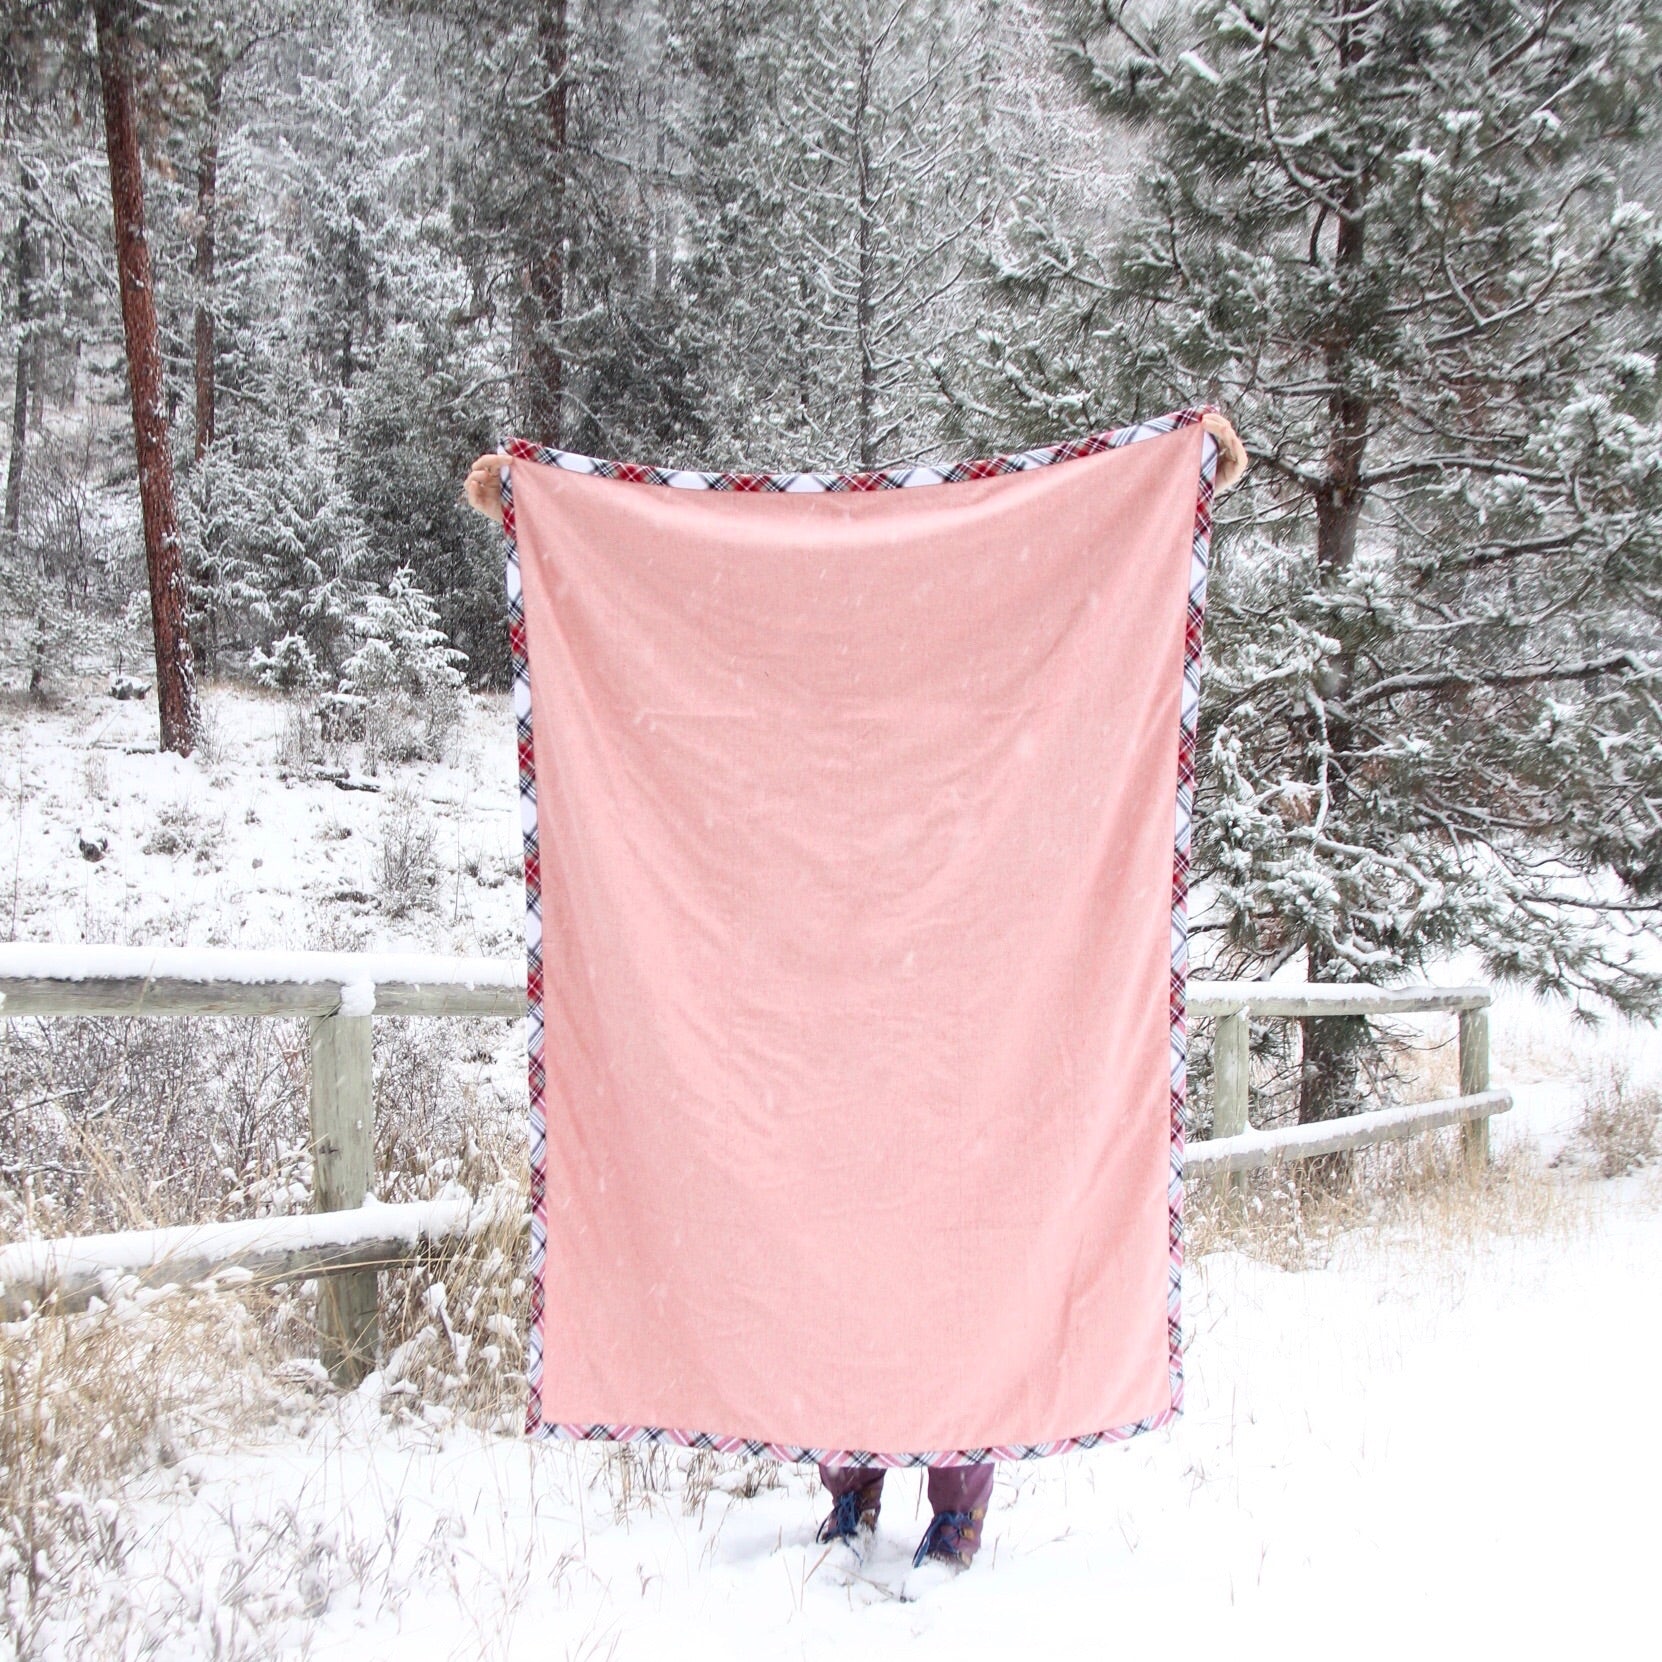 A person holds a pink blanket with flannel trim in front of them in the snow. Snow covered trees and a wooden fence are in the background. 